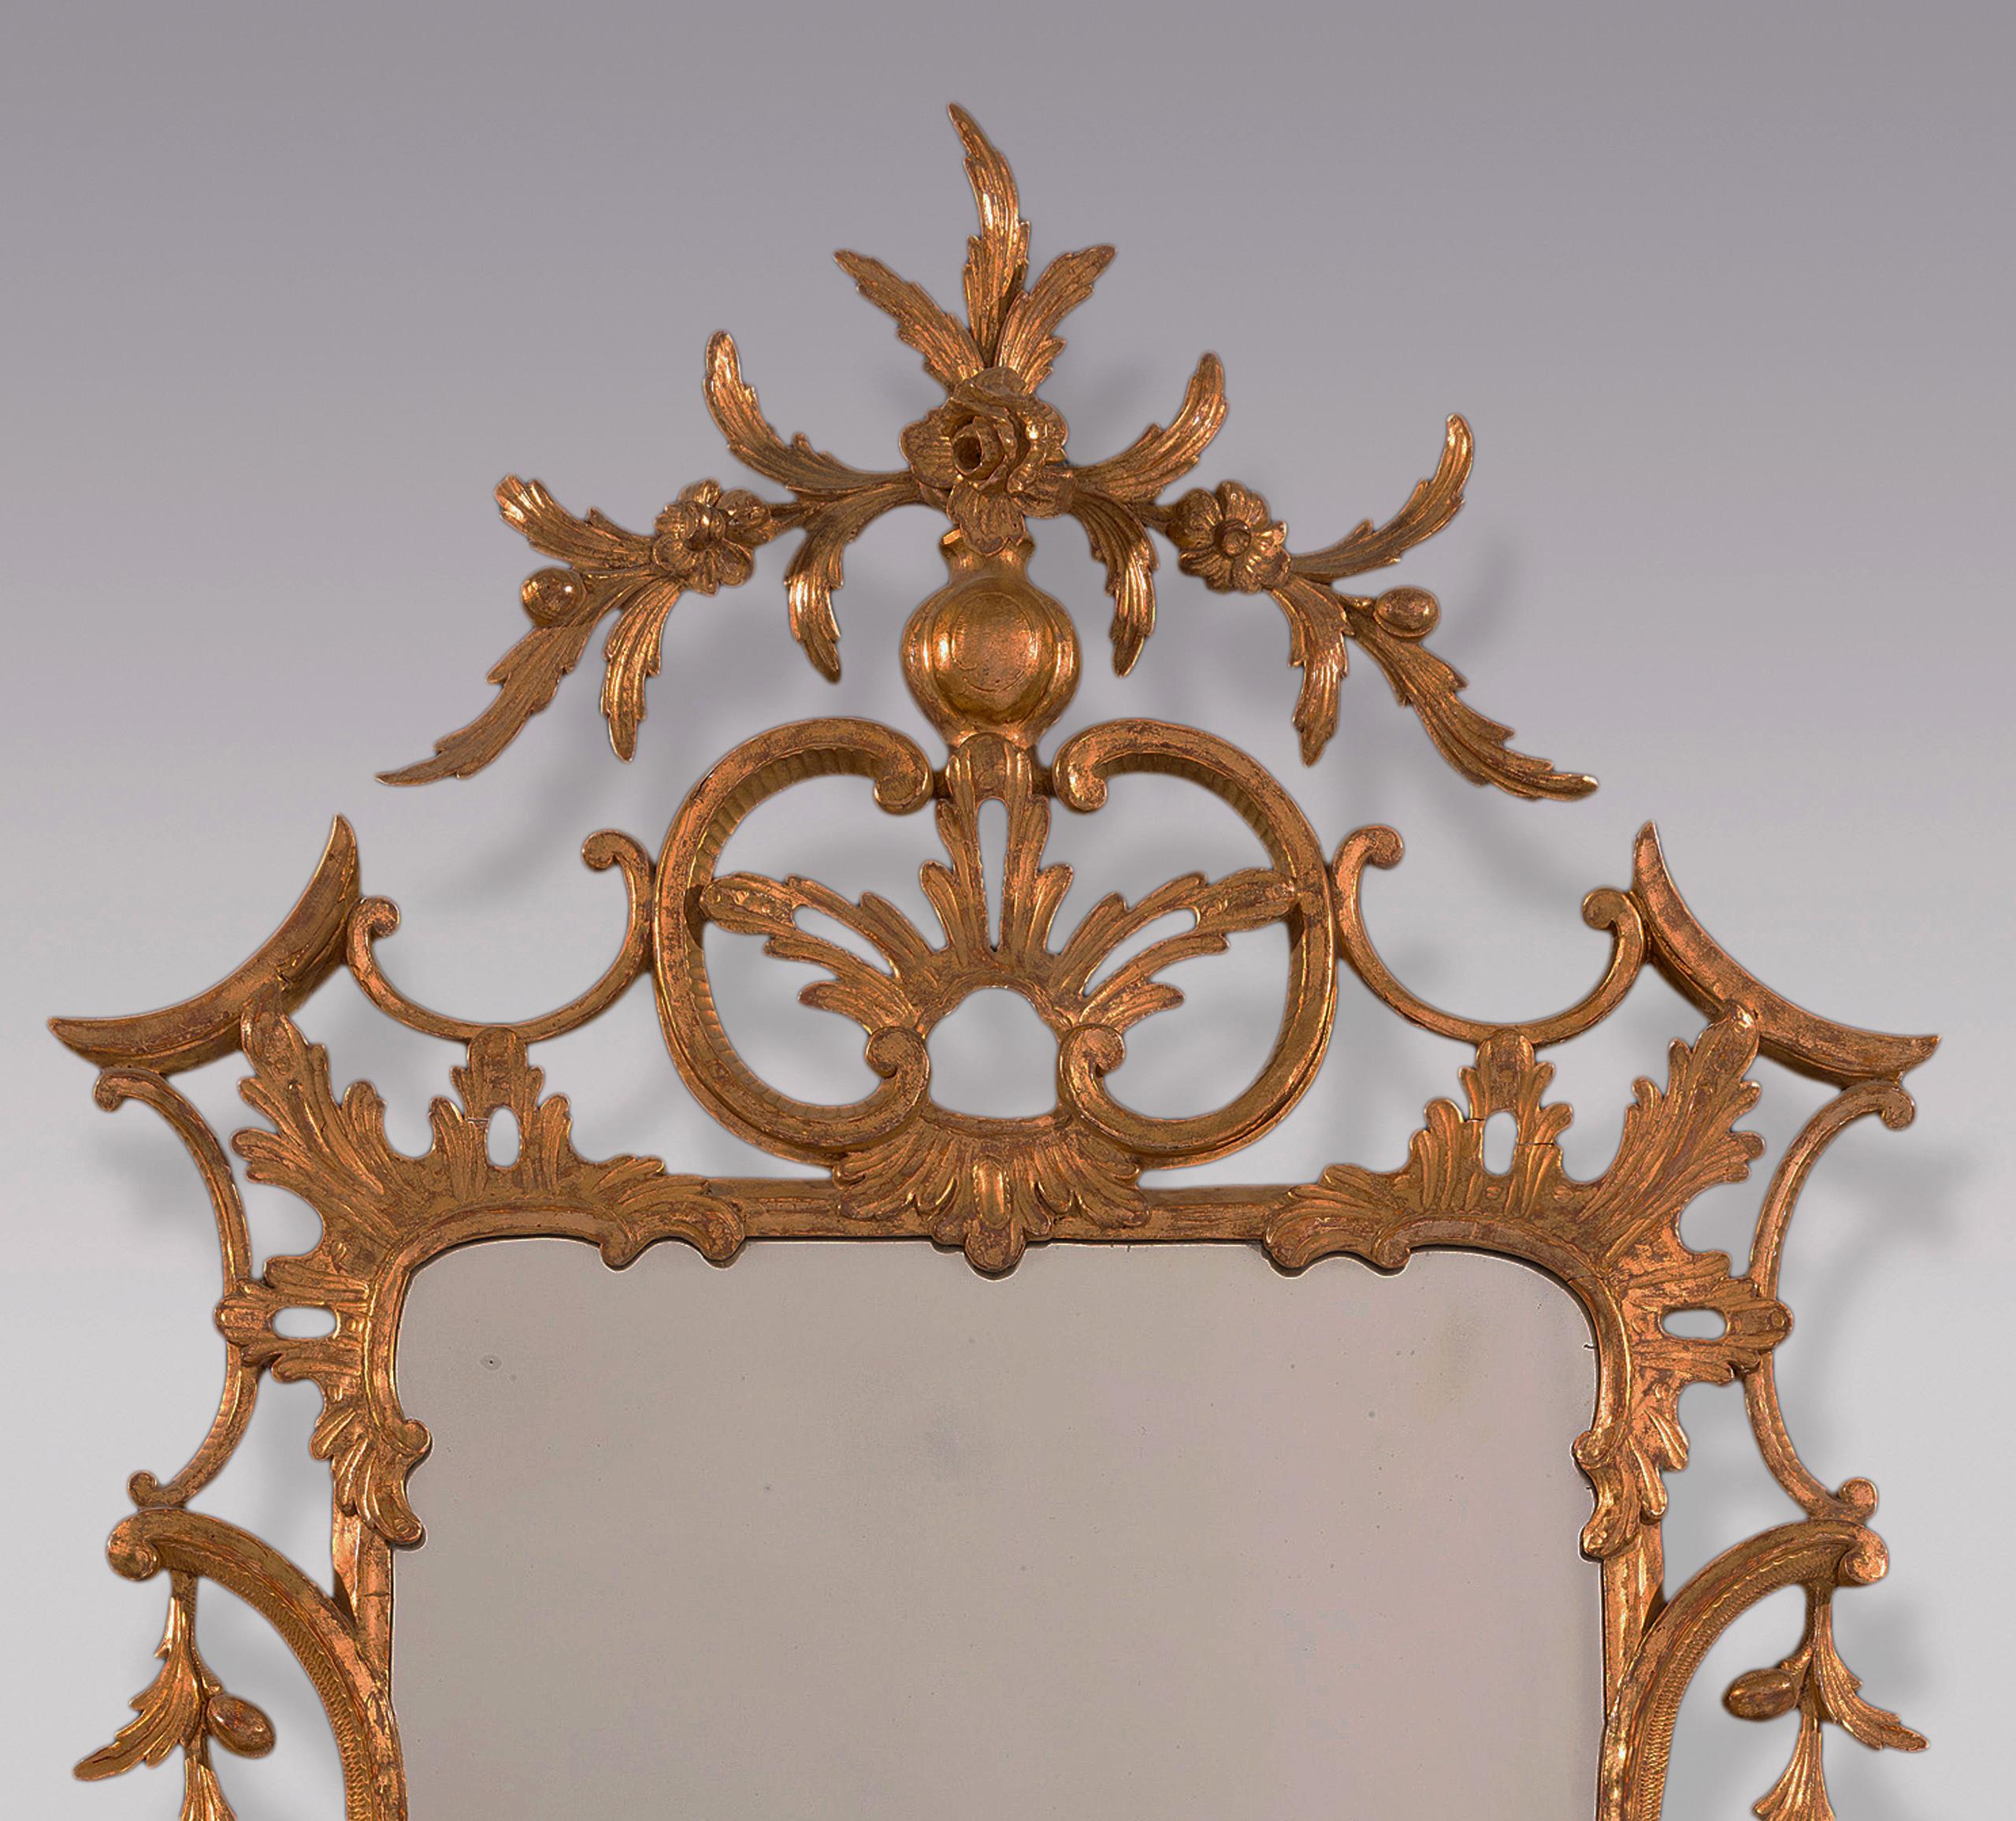 A finely carved Mid-18th Century Chippendale period giltwood Mirror having acanthus leaf & “C” scroll decoration throughout with fruit & flower pendants above central cartouche with vase, flowers and leaves.